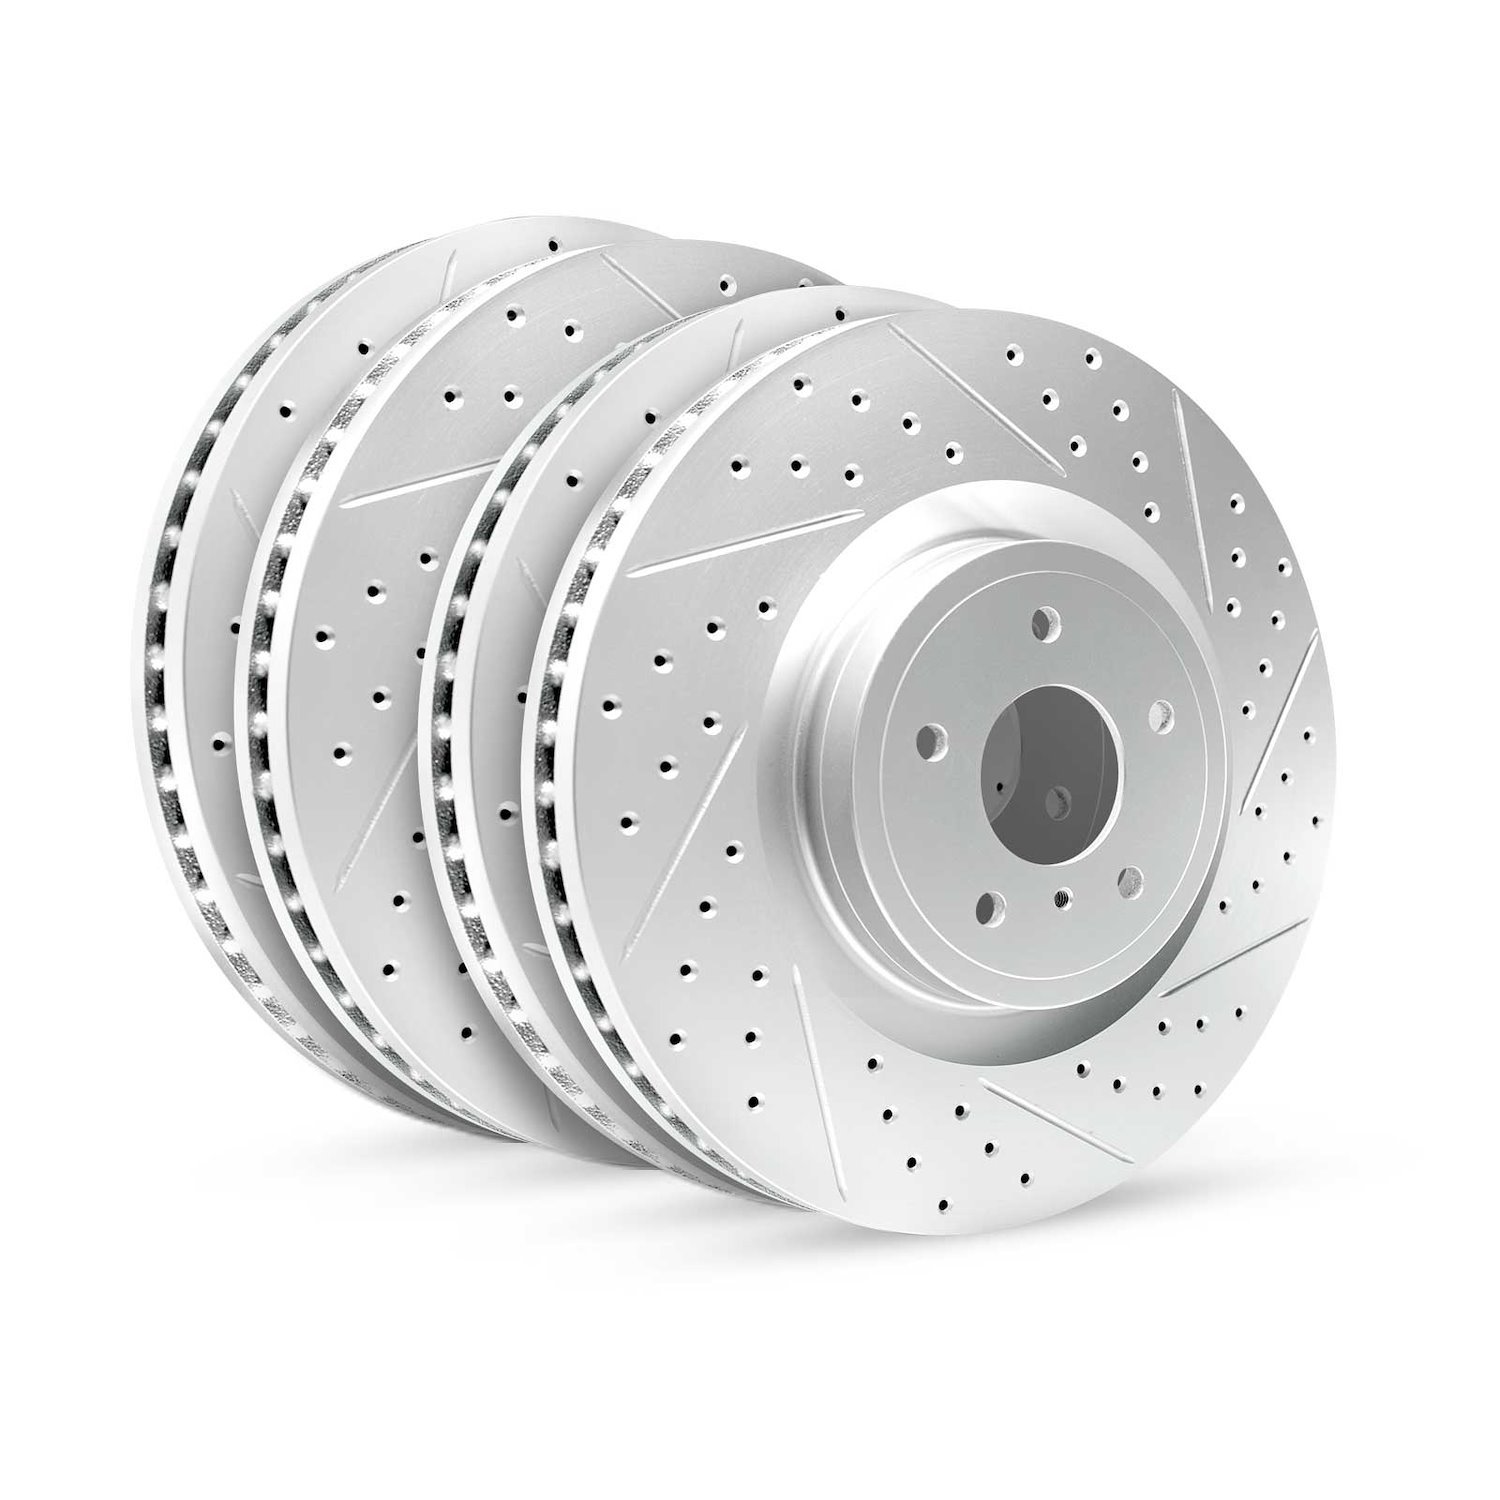 GEO-Carbon Drilled/Slotted Rotors, 1999-2005 Ford/Mazda,